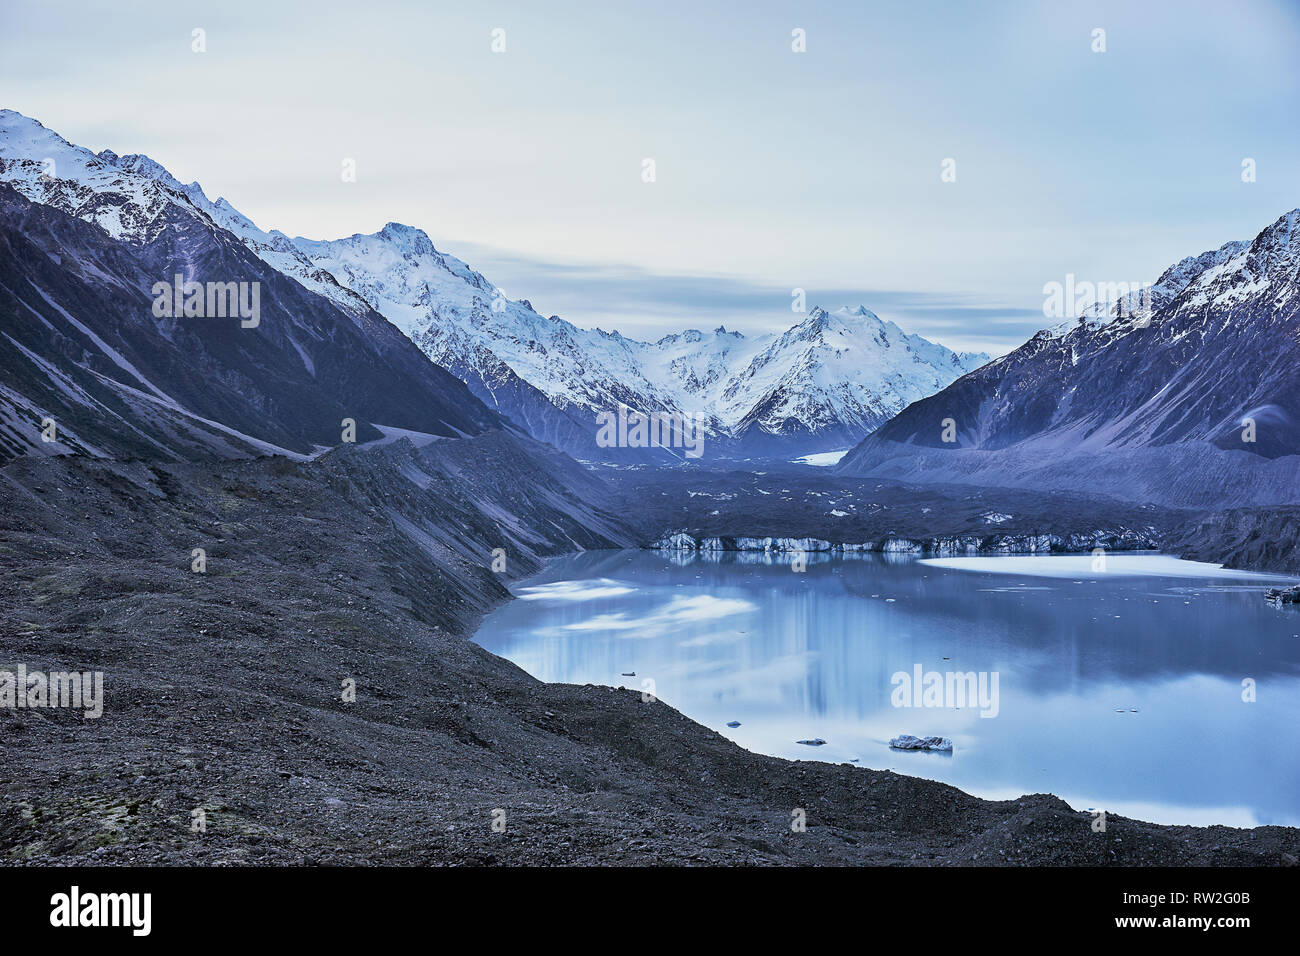 Cold winter morning in mountain with snow-covered peaks.  Splendid outdoor scene of Mount Cook. Beautiful light blue Tasman Glacier Lake. Stock Photo